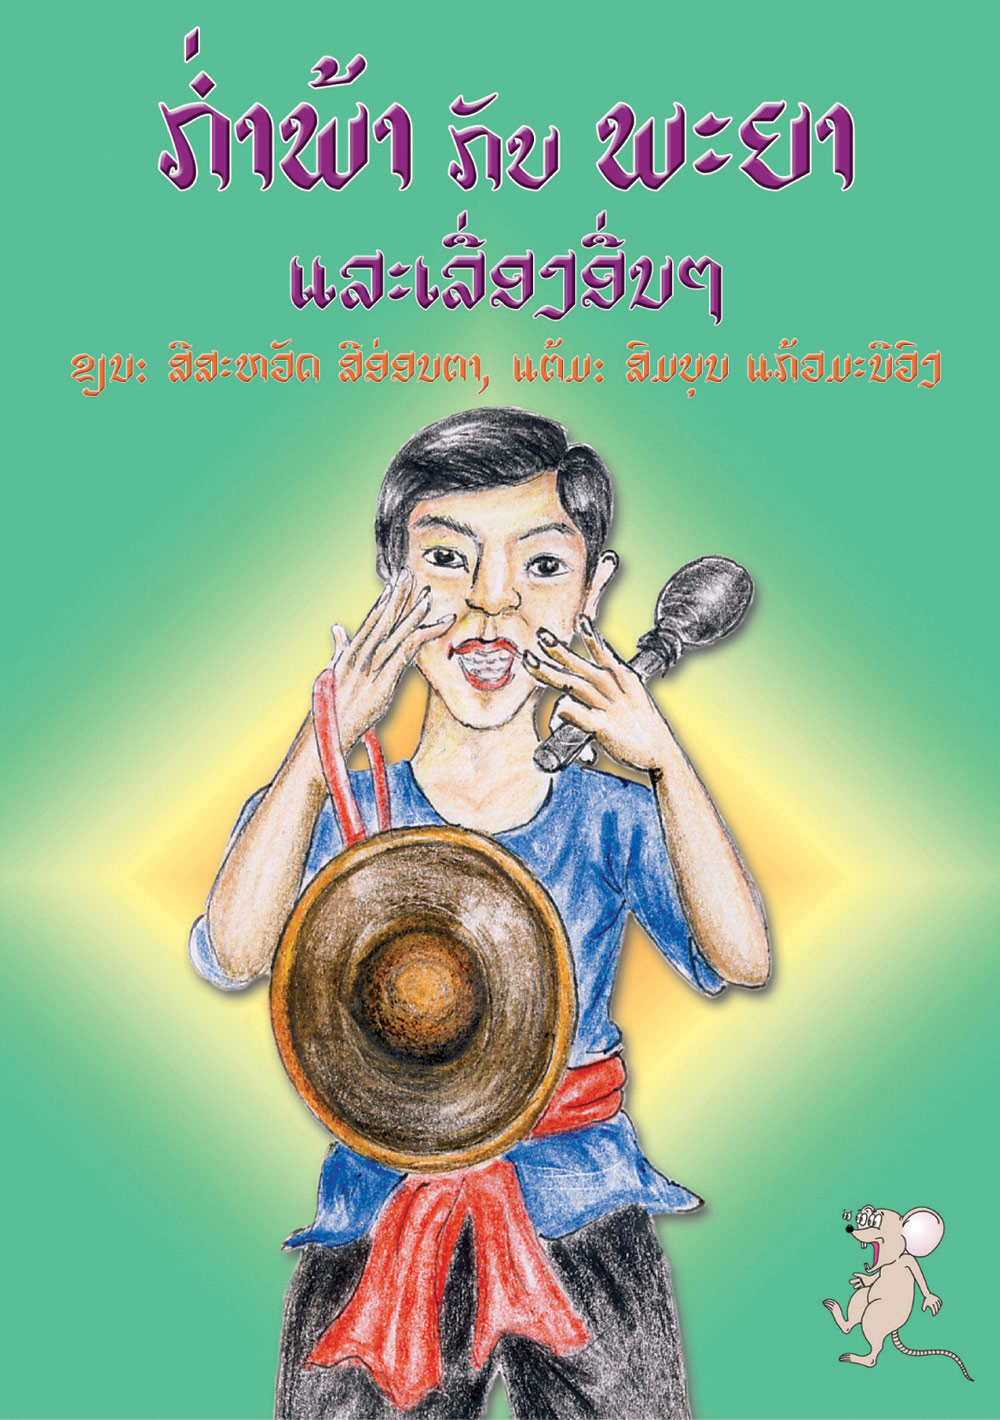 The Orphan and the King large book cover, published in Lao language